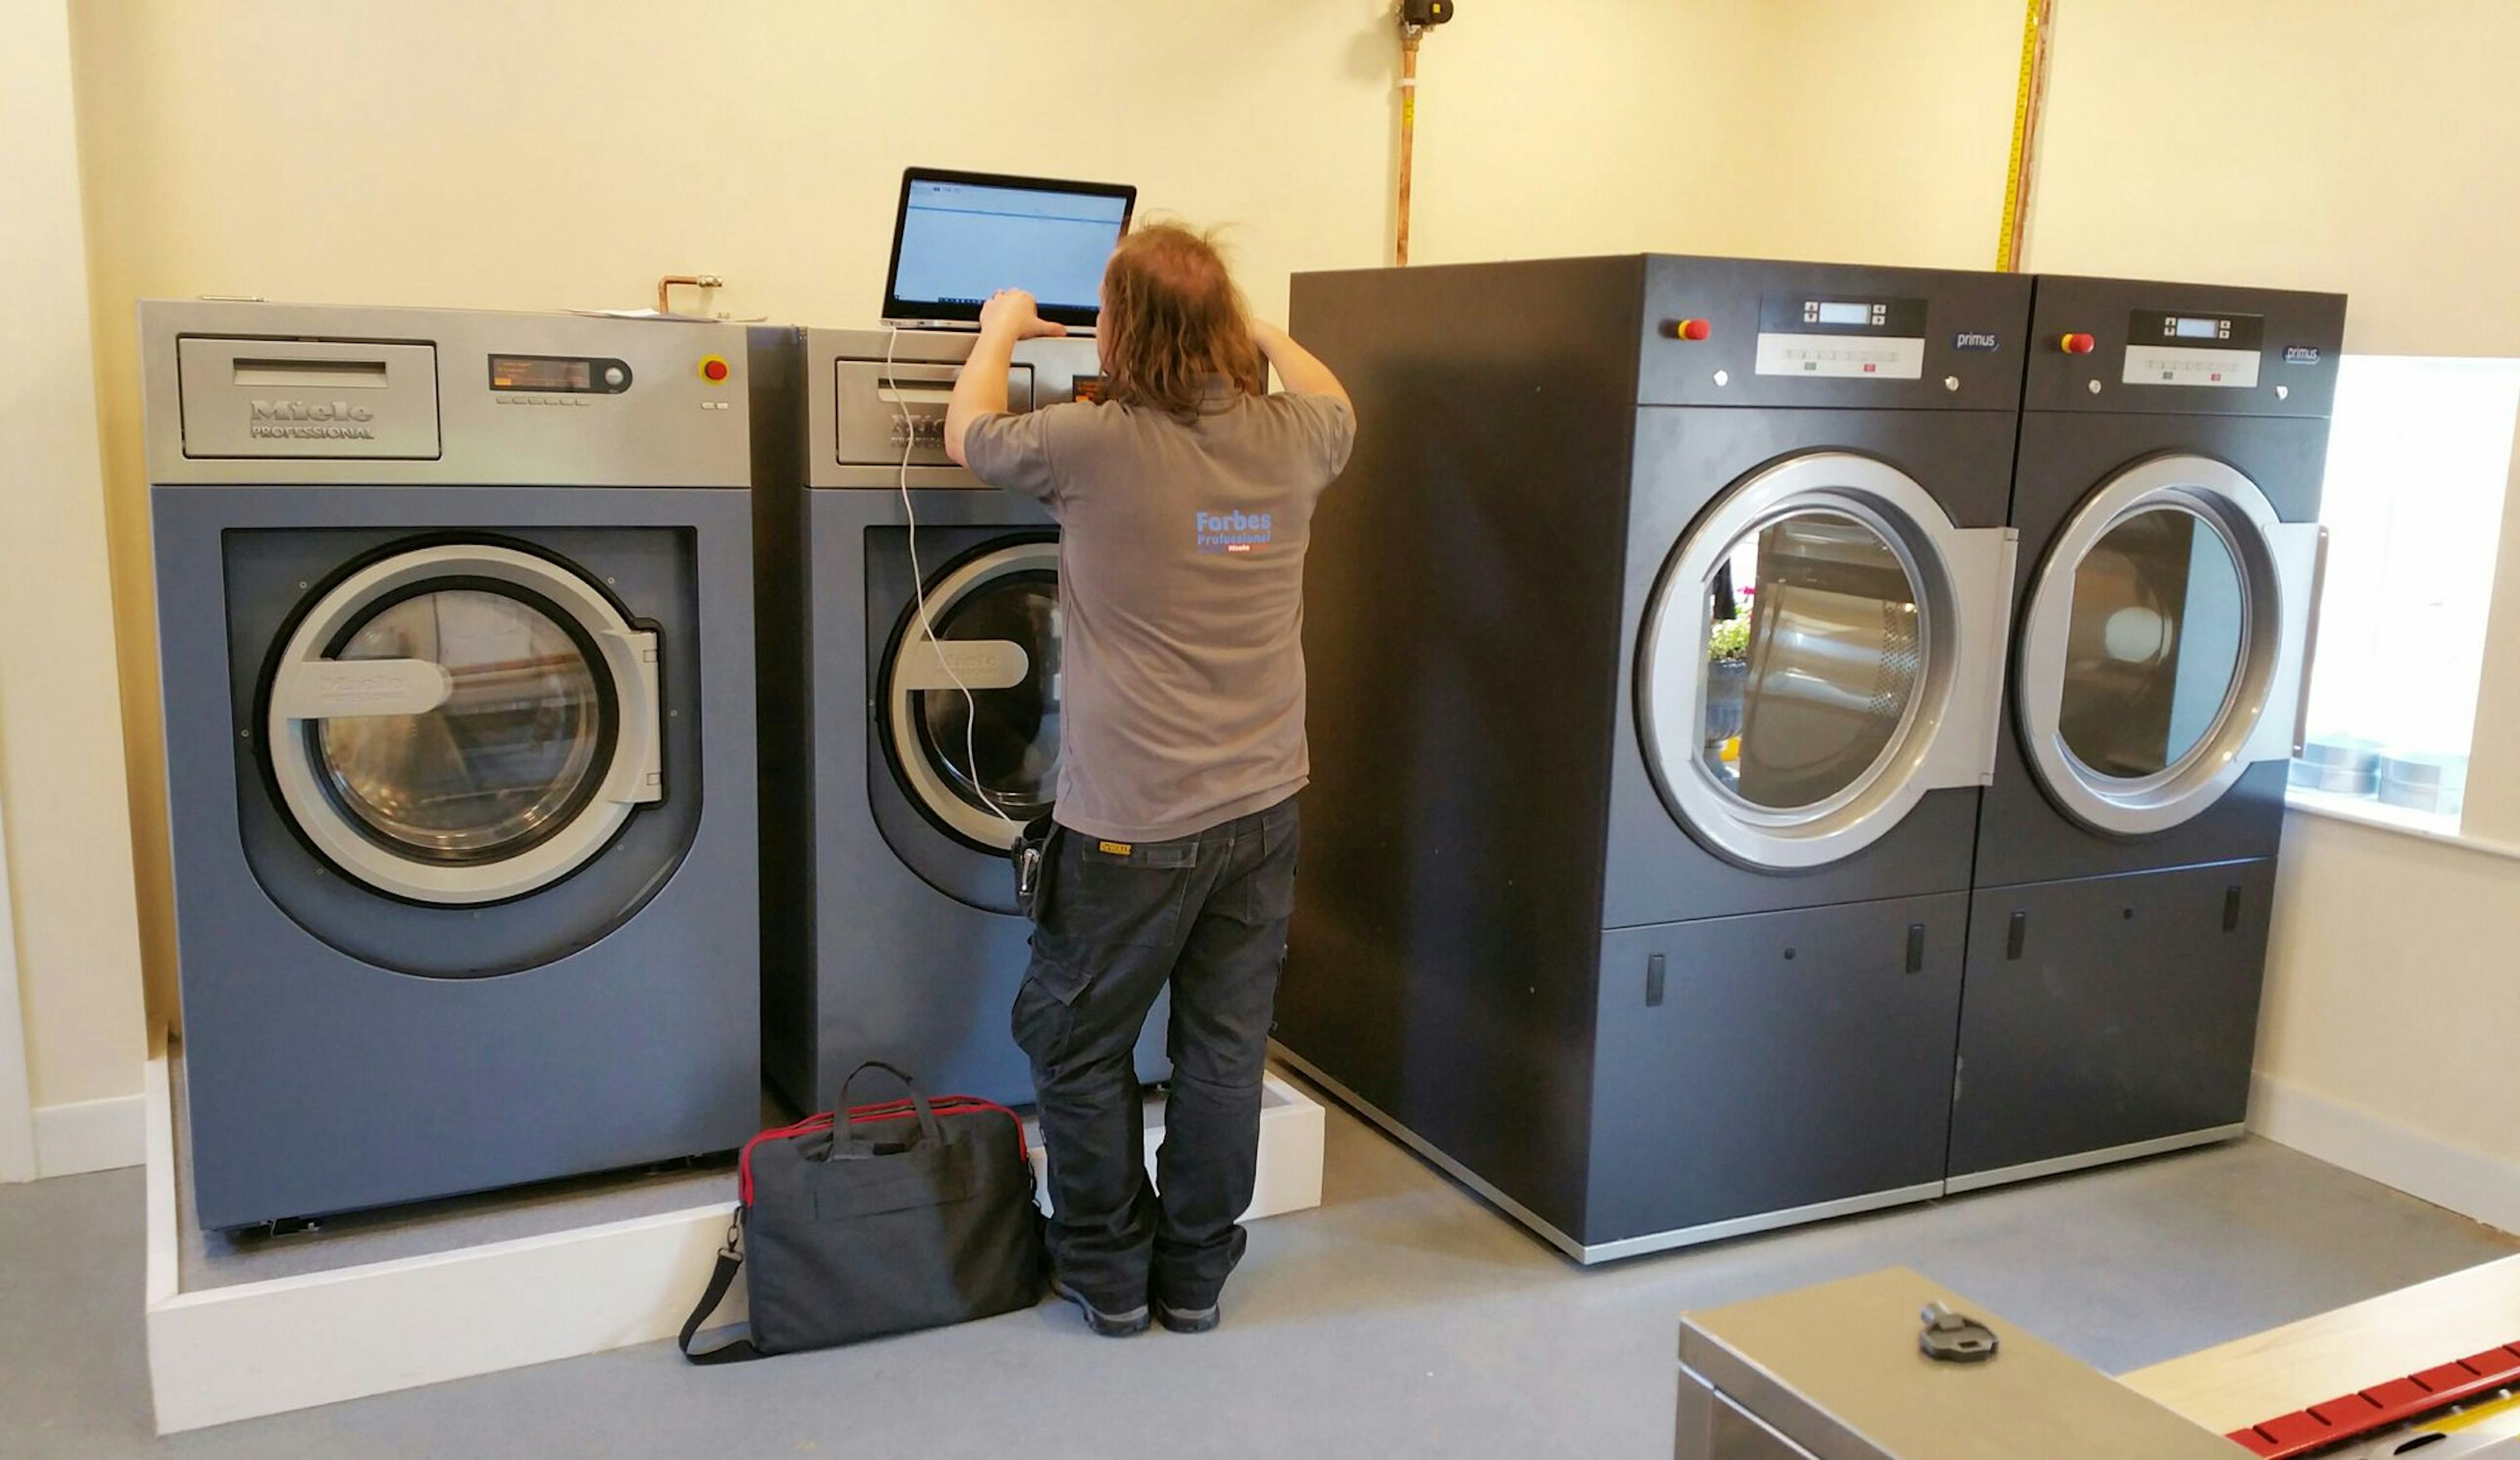 With care home providers facing soaring energy costs, Forbes Professional advises on how to optimise laundry room efficiency.